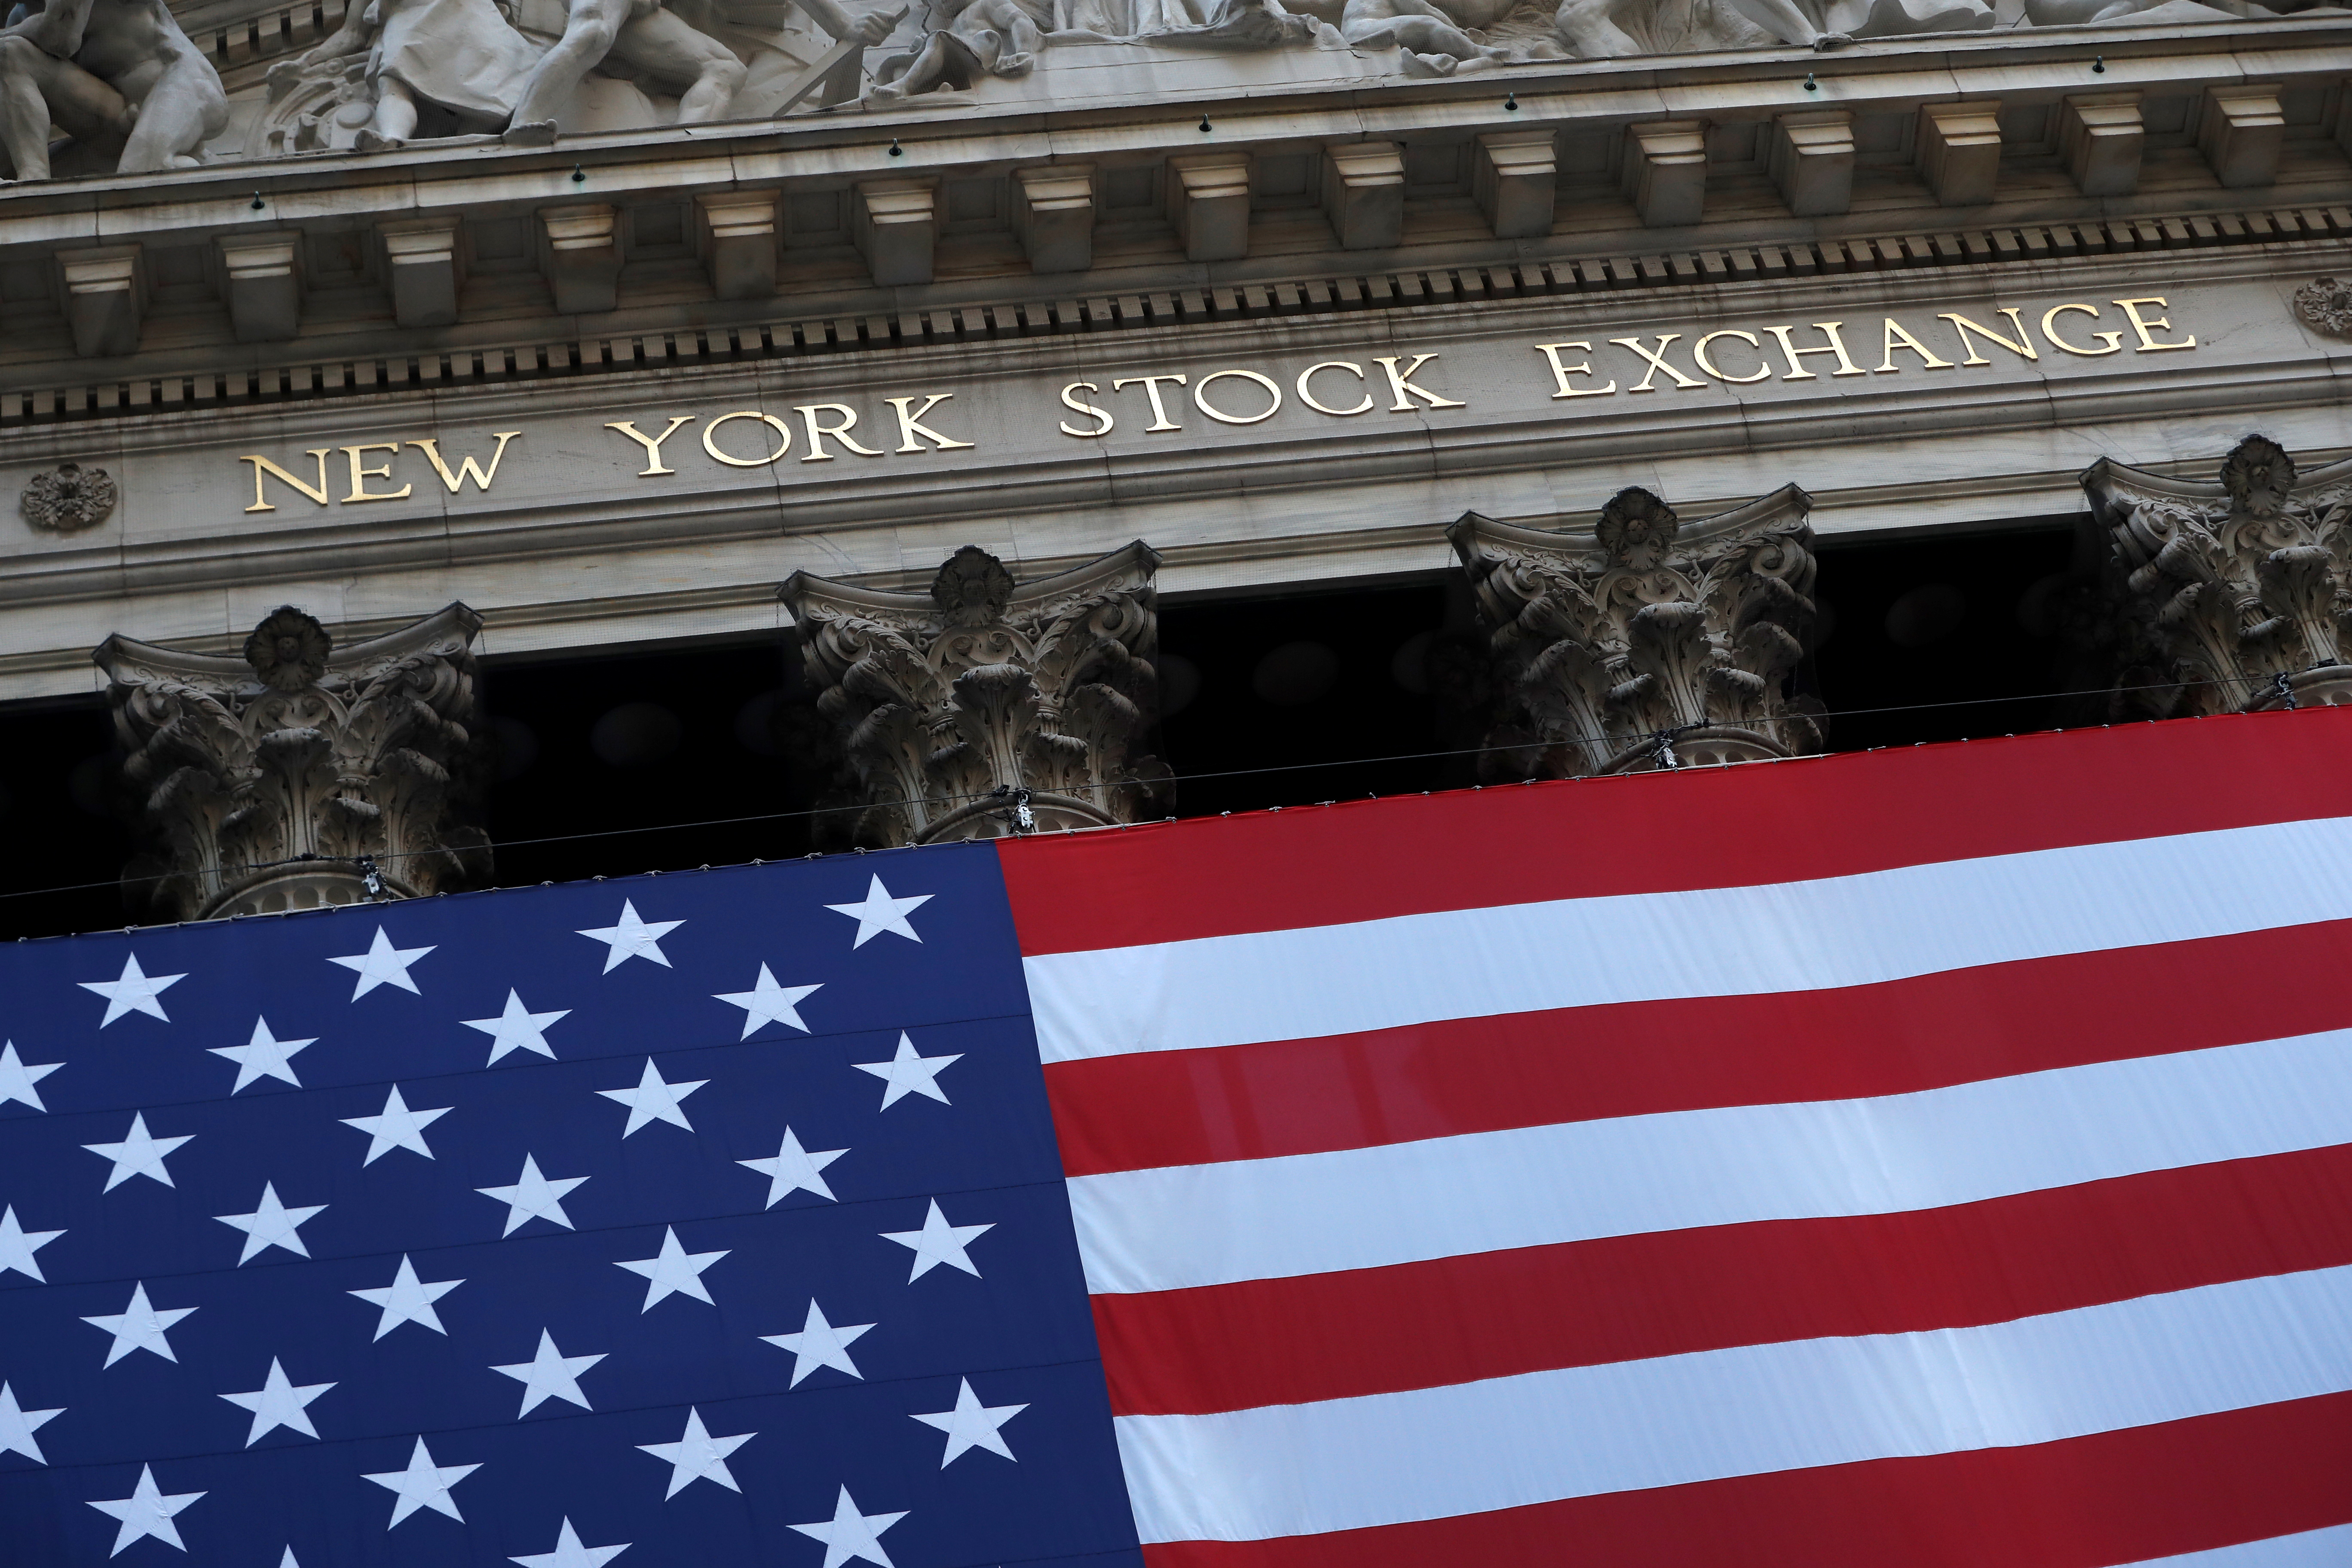 The U.S. flag is seen on the New York Stock Exchange (NYSE) following Election Day in Manhattan, New York City, U.S., November 4, 2020. REUTERS/Andrew Kelly